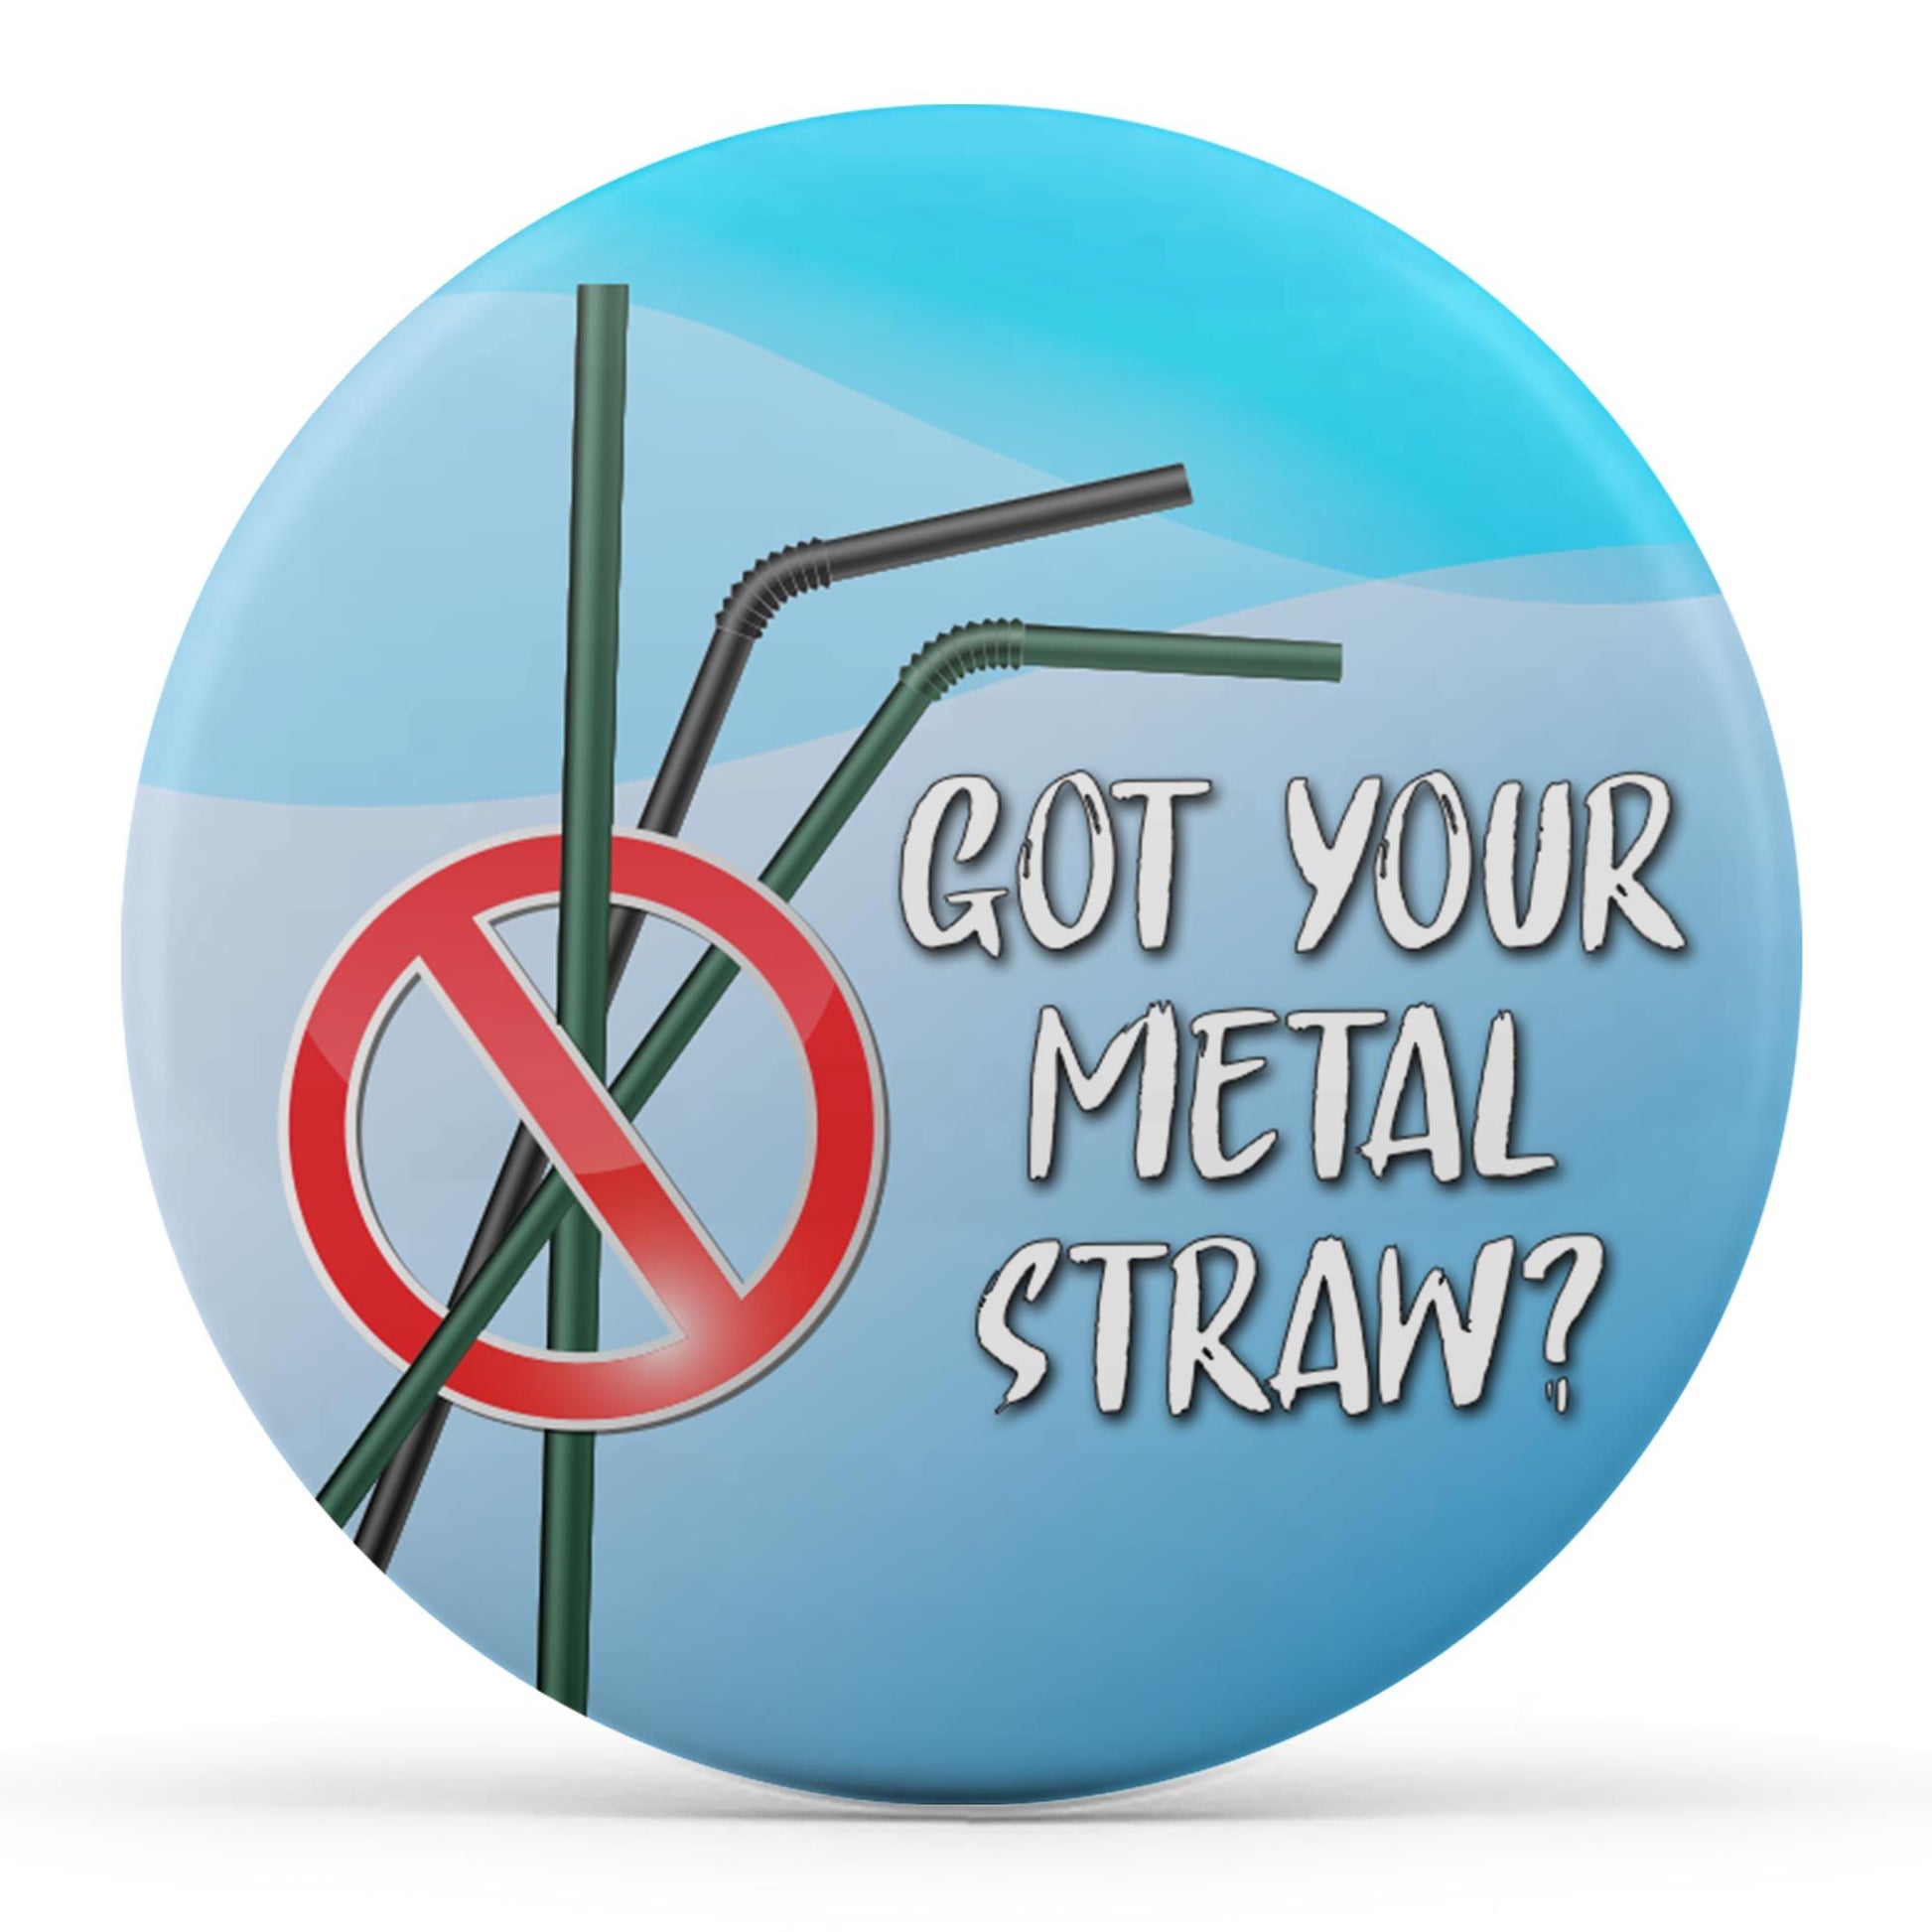 Got Your Metal Straw? Image